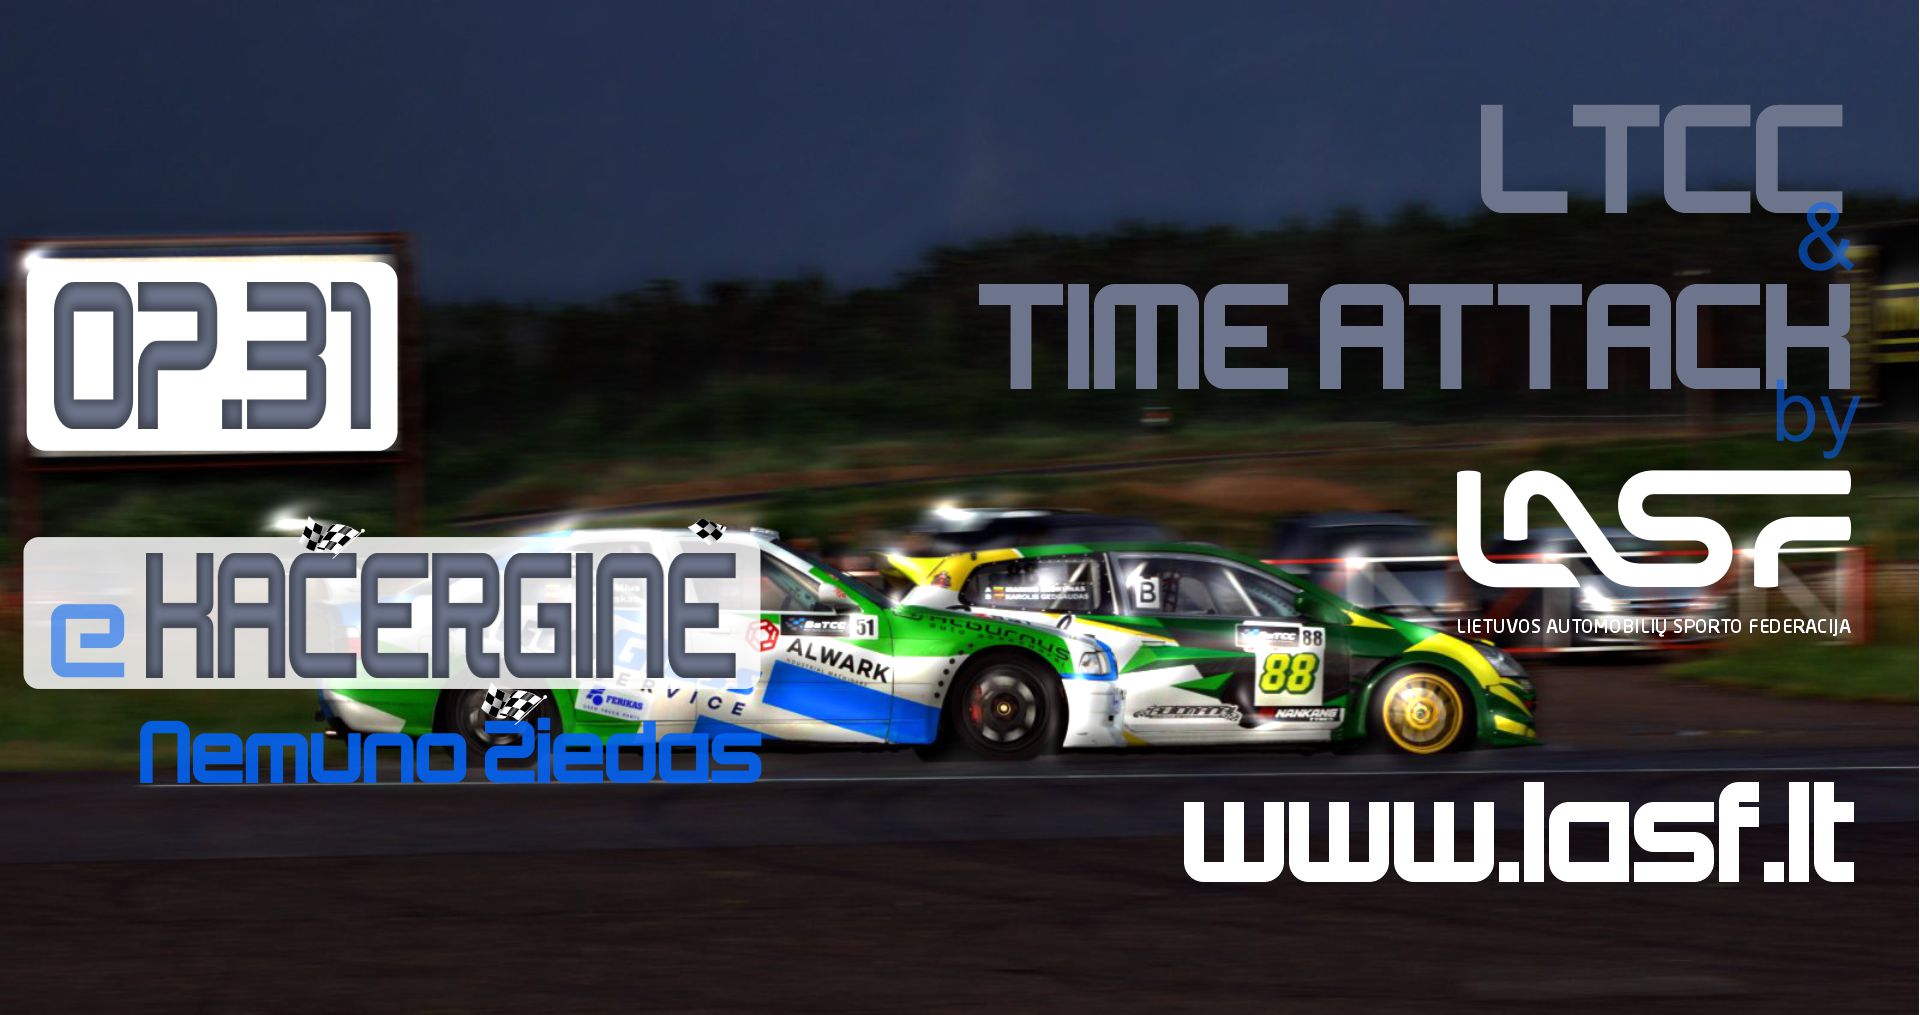 LTCC & Time Attack Race (2-nd Round)